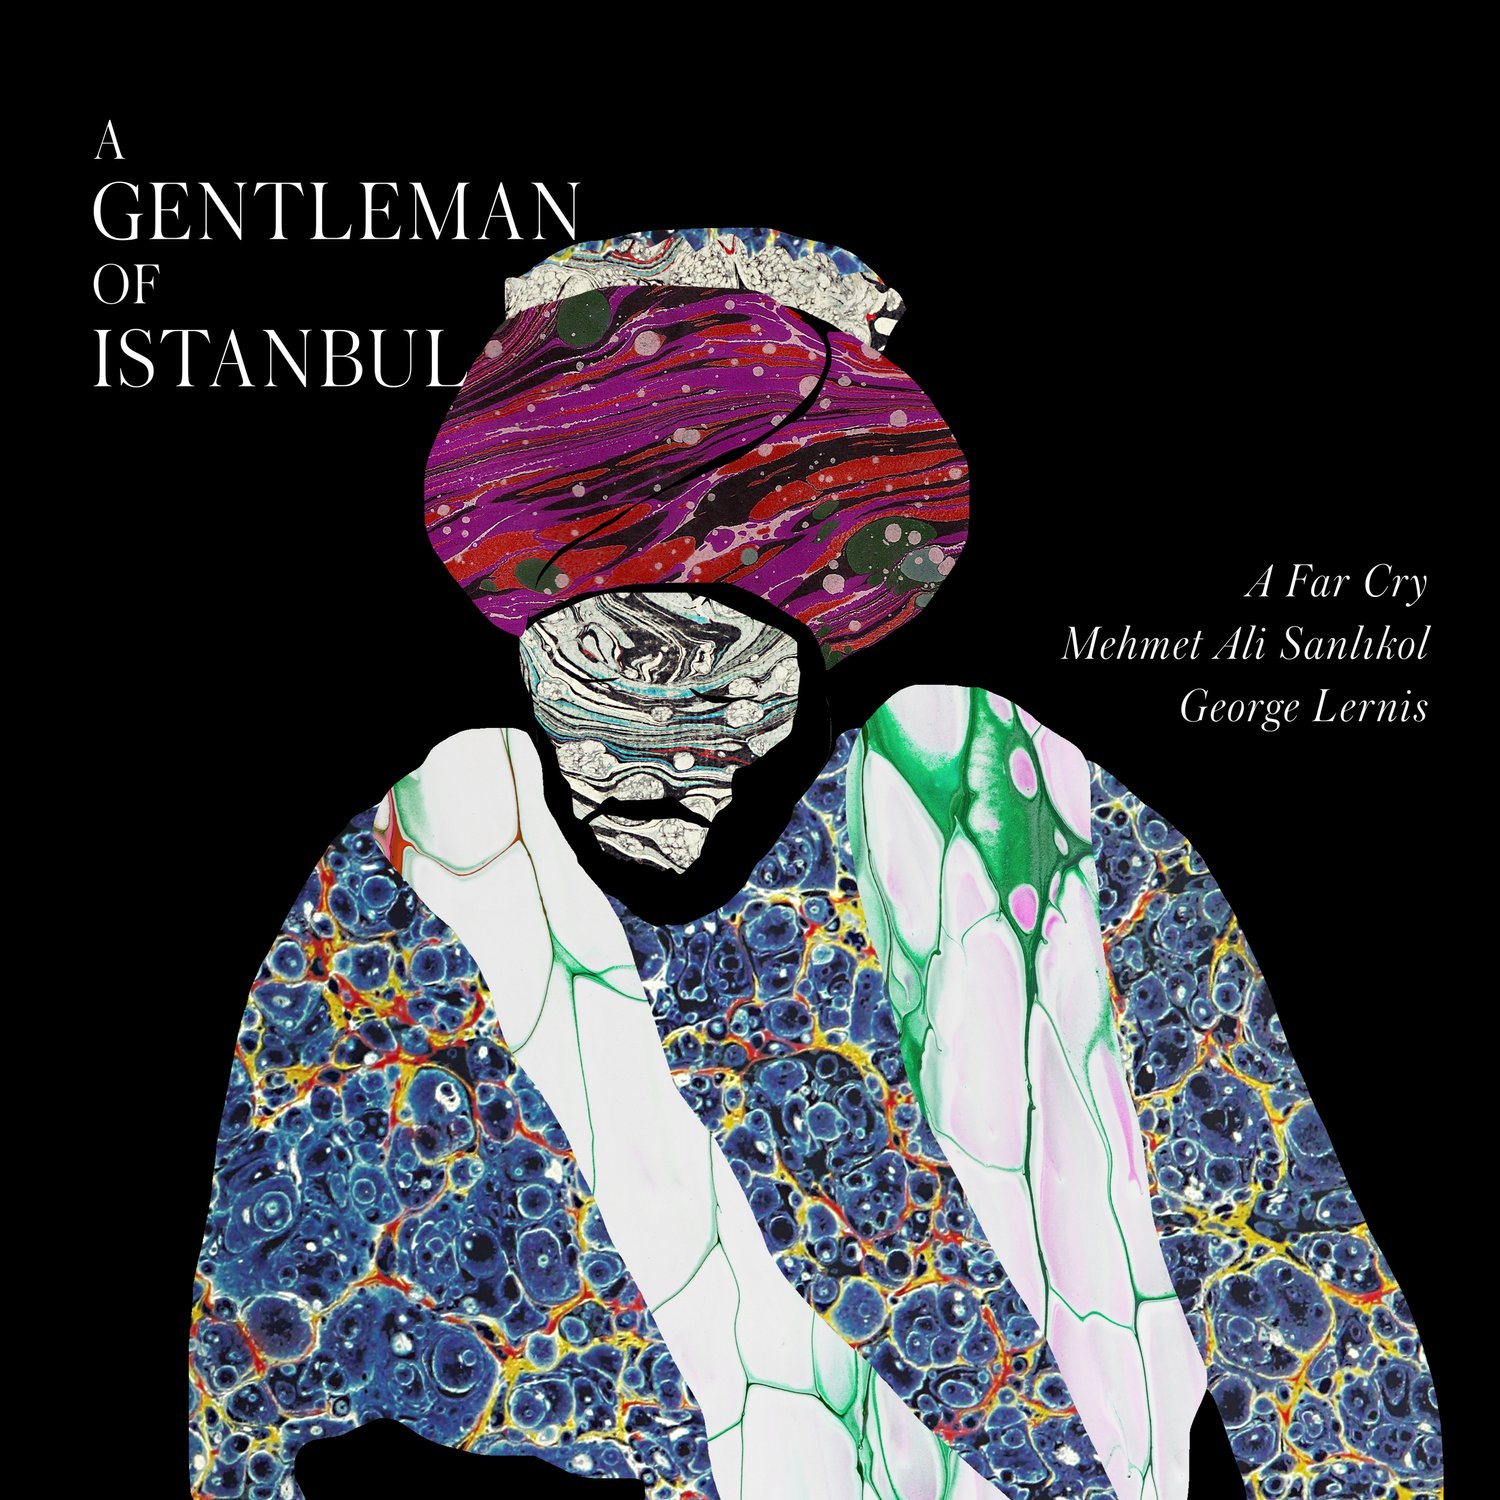 Album art for A Gentleman of Istanbul by A Far Cry and Mehmet Ali Sanlikol